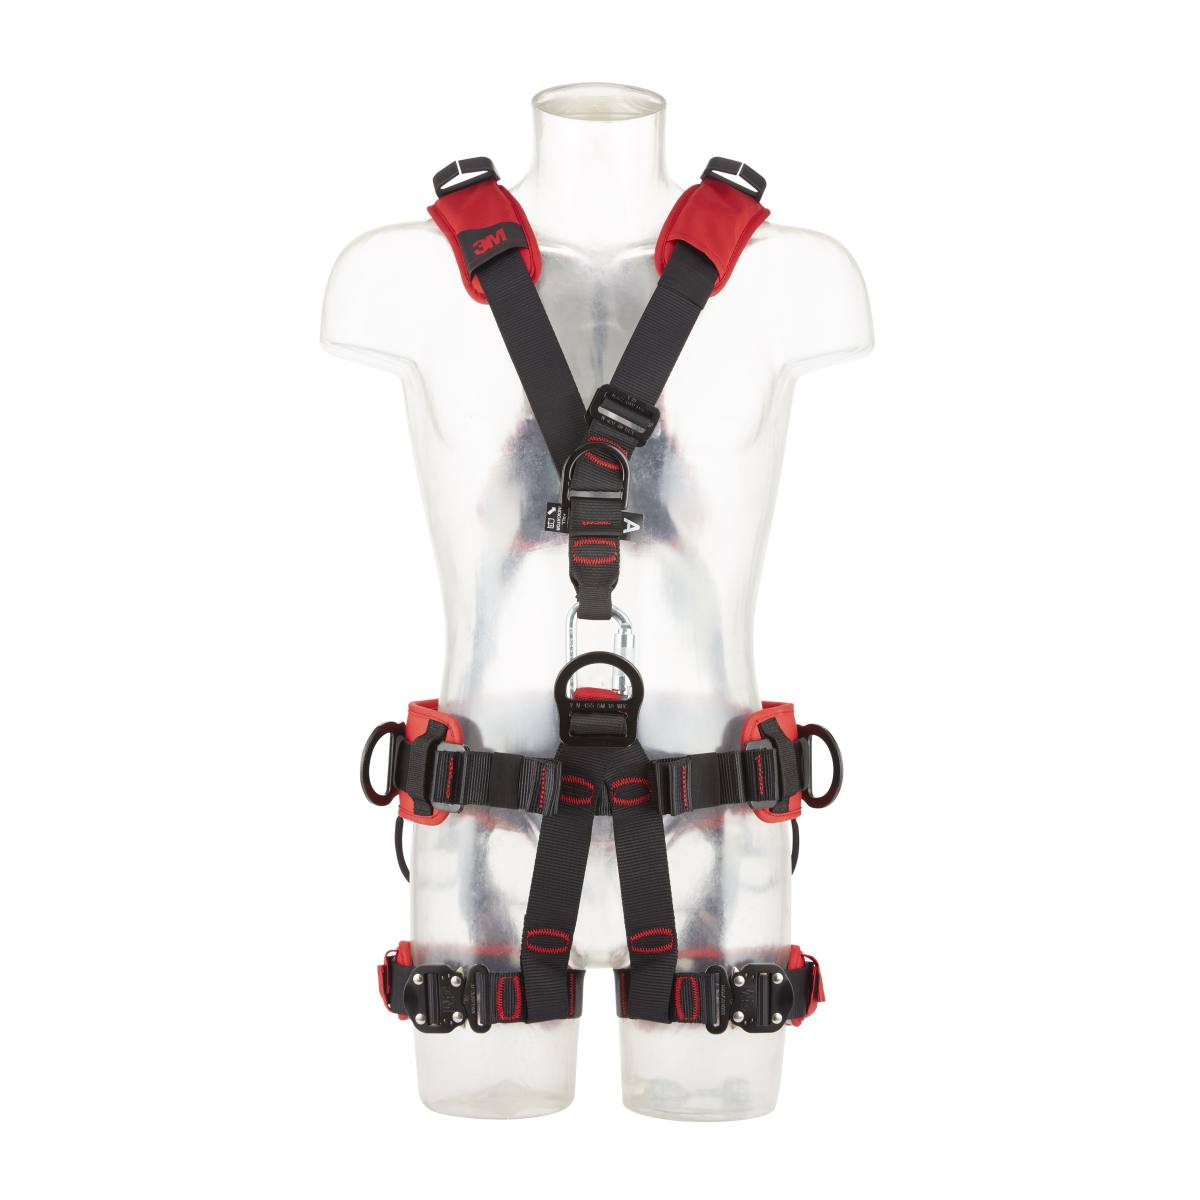 3M PROTECTA Suspension harness - chest and back fall-arrest eyelets with fall indicators, comfort harness with side attachment points, central attachment point, automatic buckles, shoulder and back padding, leg padding, label protection w... , S